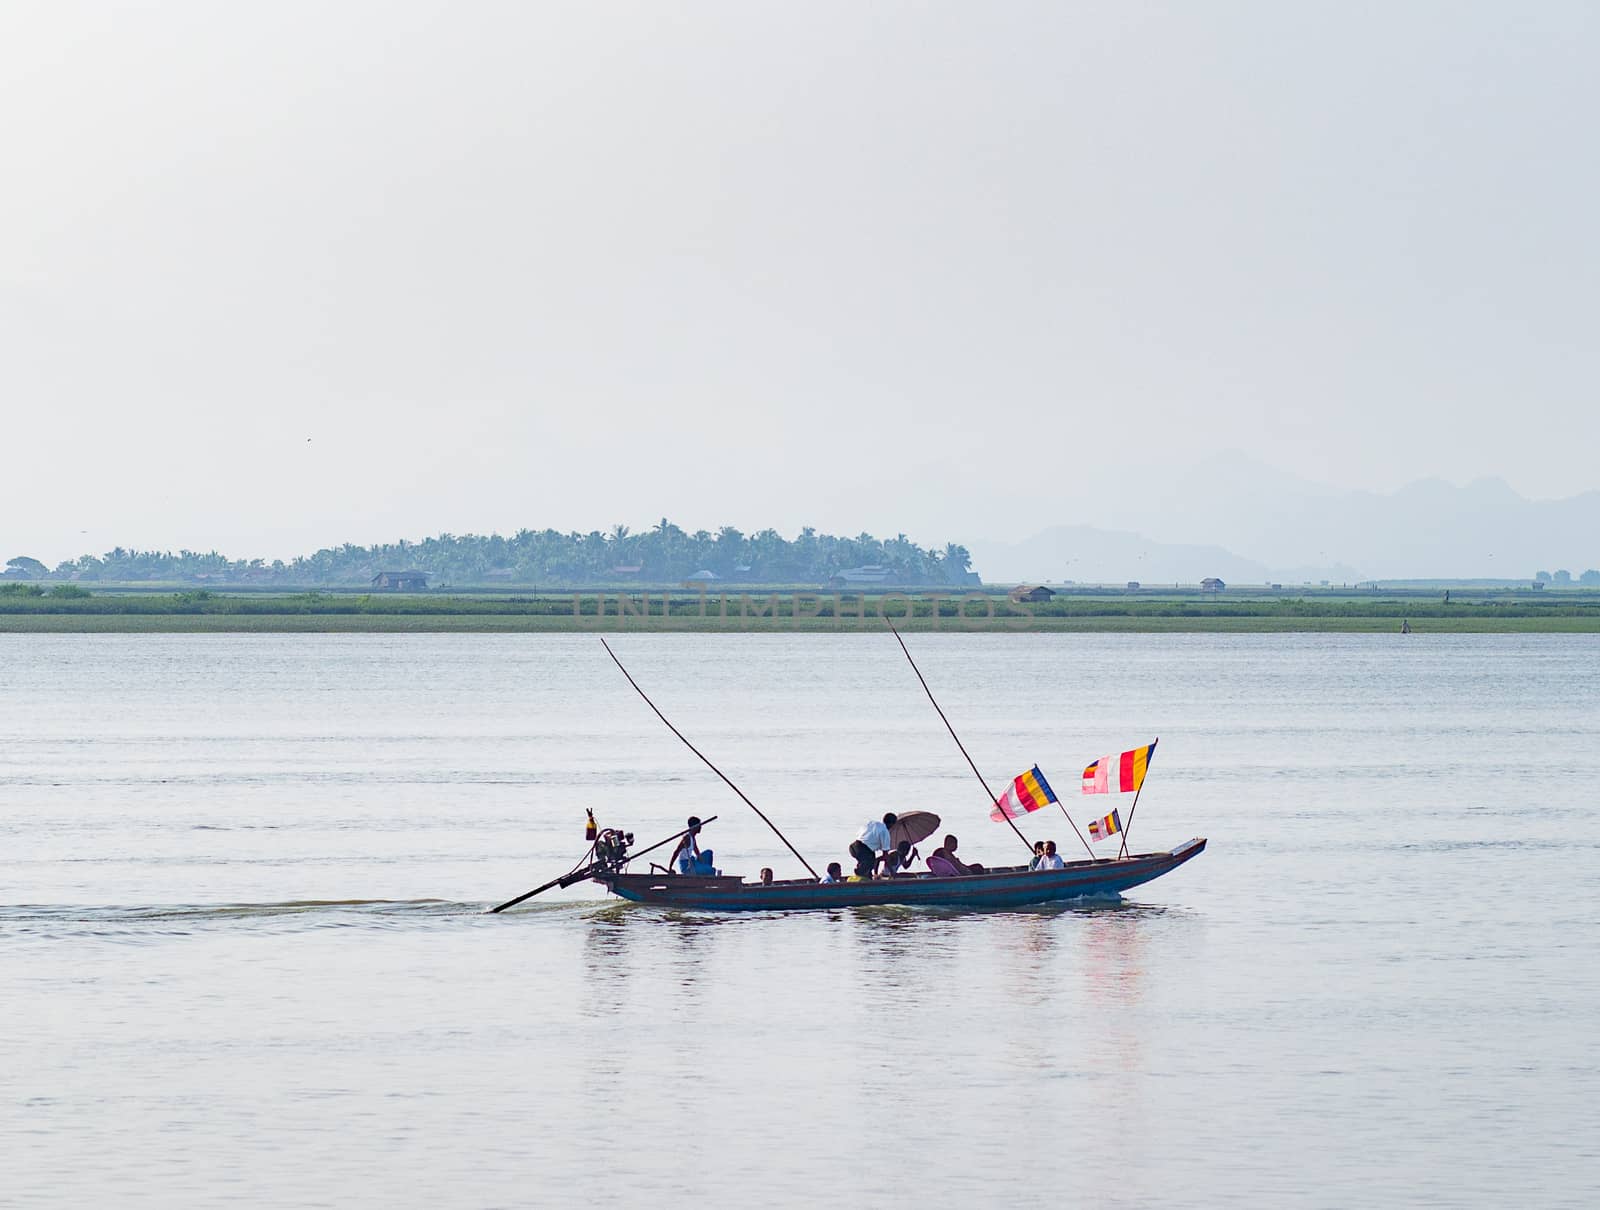 Sittwe, Rakhine State, Myanmar - October 16, 2014: Traditional boat on the Kaladan River at the Rakhine State in Myanmar flying Buddhist flags to demonstrate their religious sympathies.